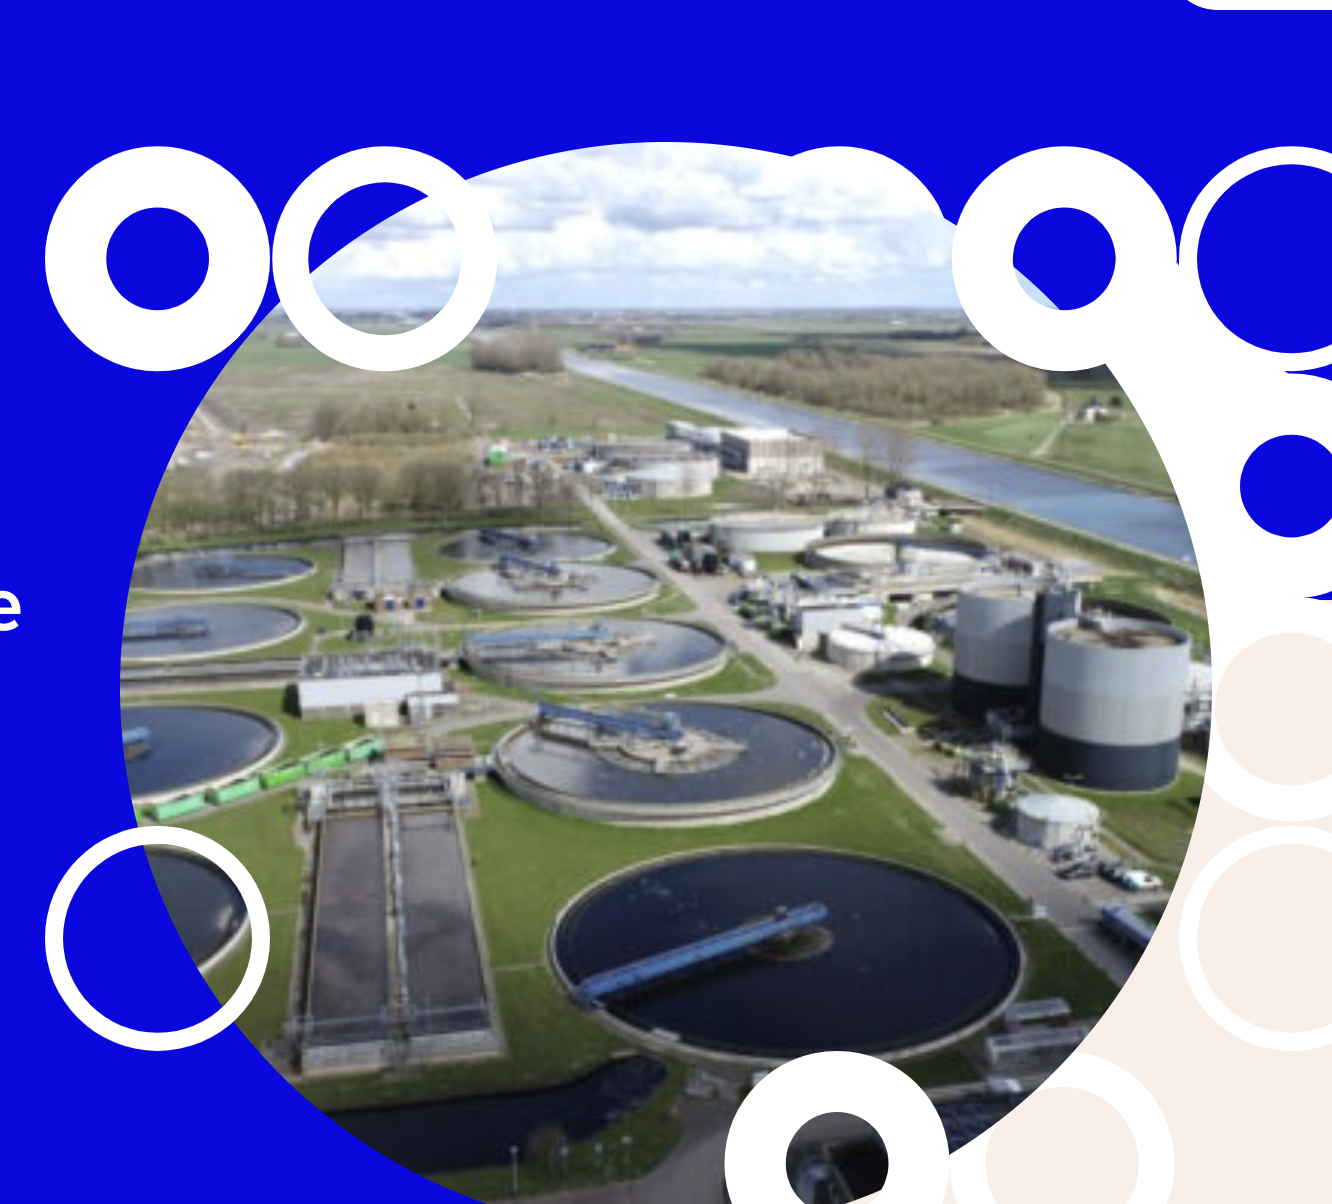 REGAIN consortium partners with NX Filtration to demonstrate municipal wastewater reuse